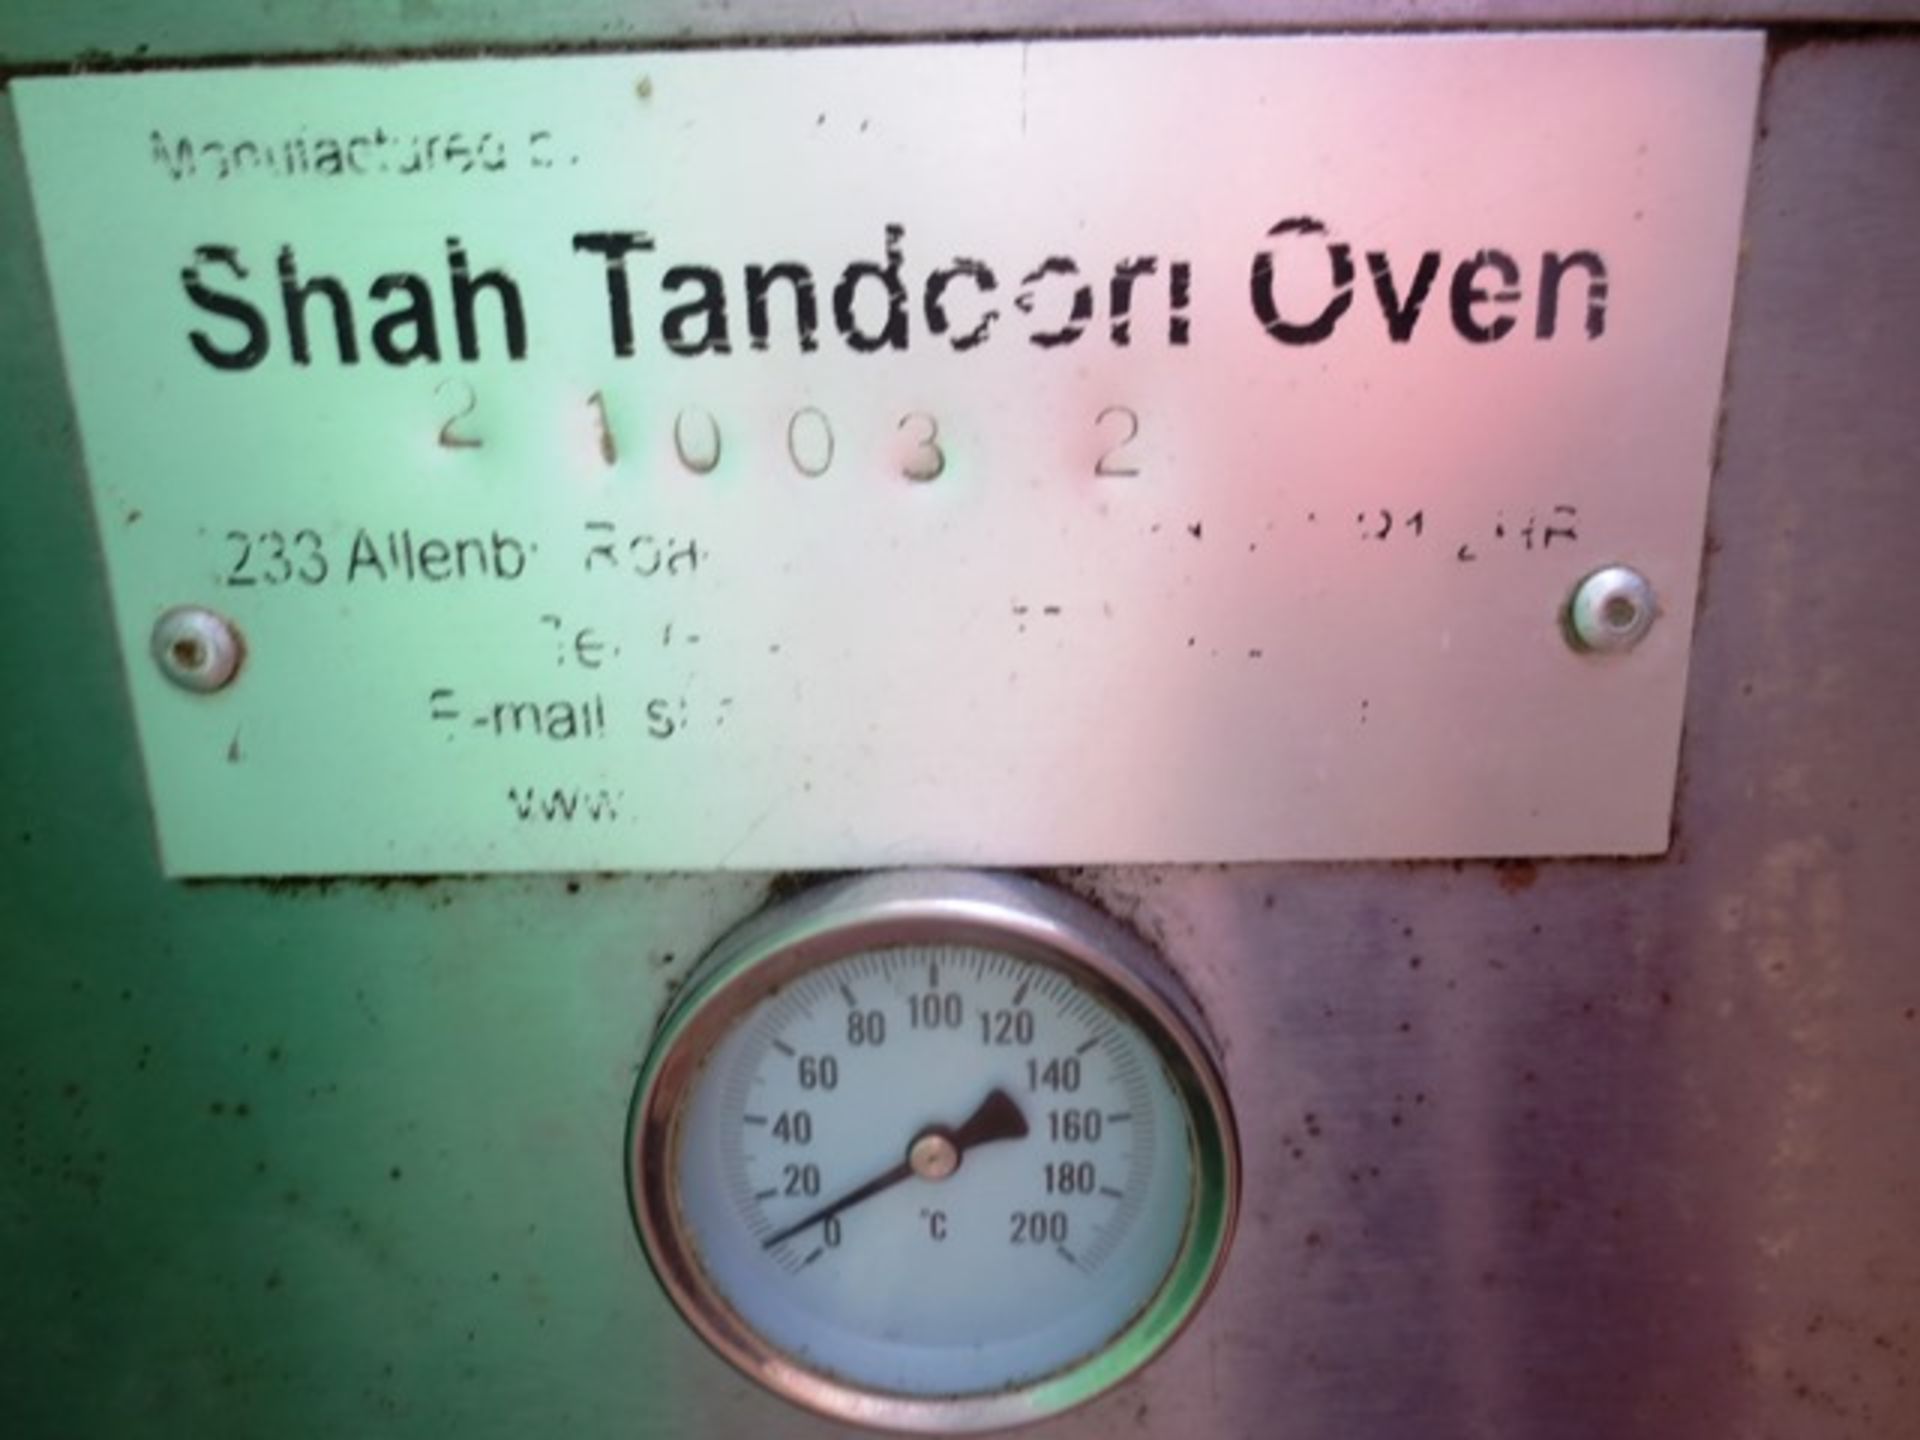 Shah Tandori Oven Company, Stainless Steel, gas fired tandori oven, serial number:210032, - Image 2 of 5